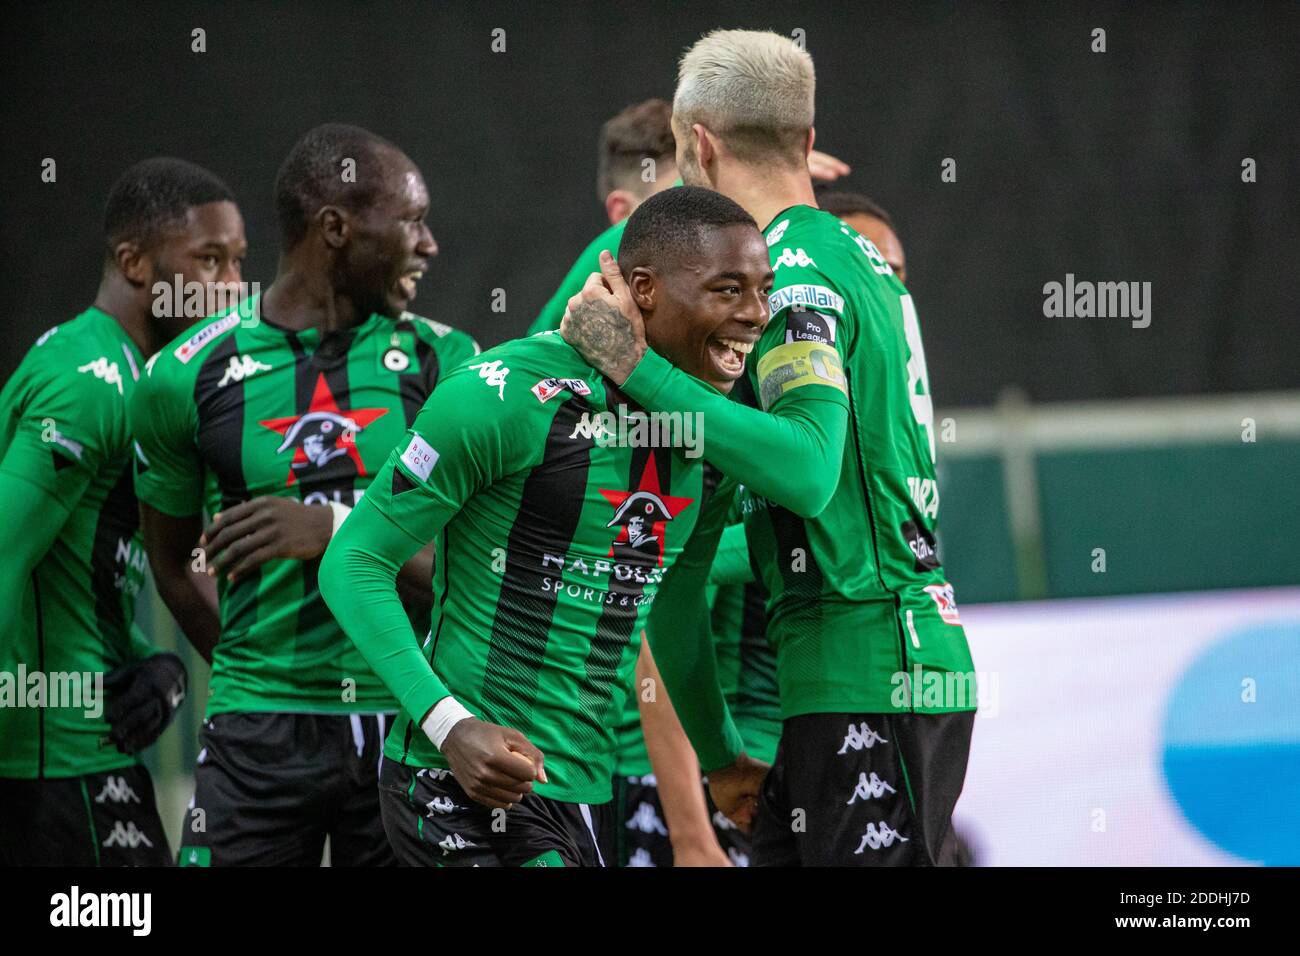 Cercle's Jeremy Taravel and Cercle's Anthony Musaba celebrate after scoring during a postponed soccer match between Cercle Brugge KSV and RE Mouscron, Stock Photo